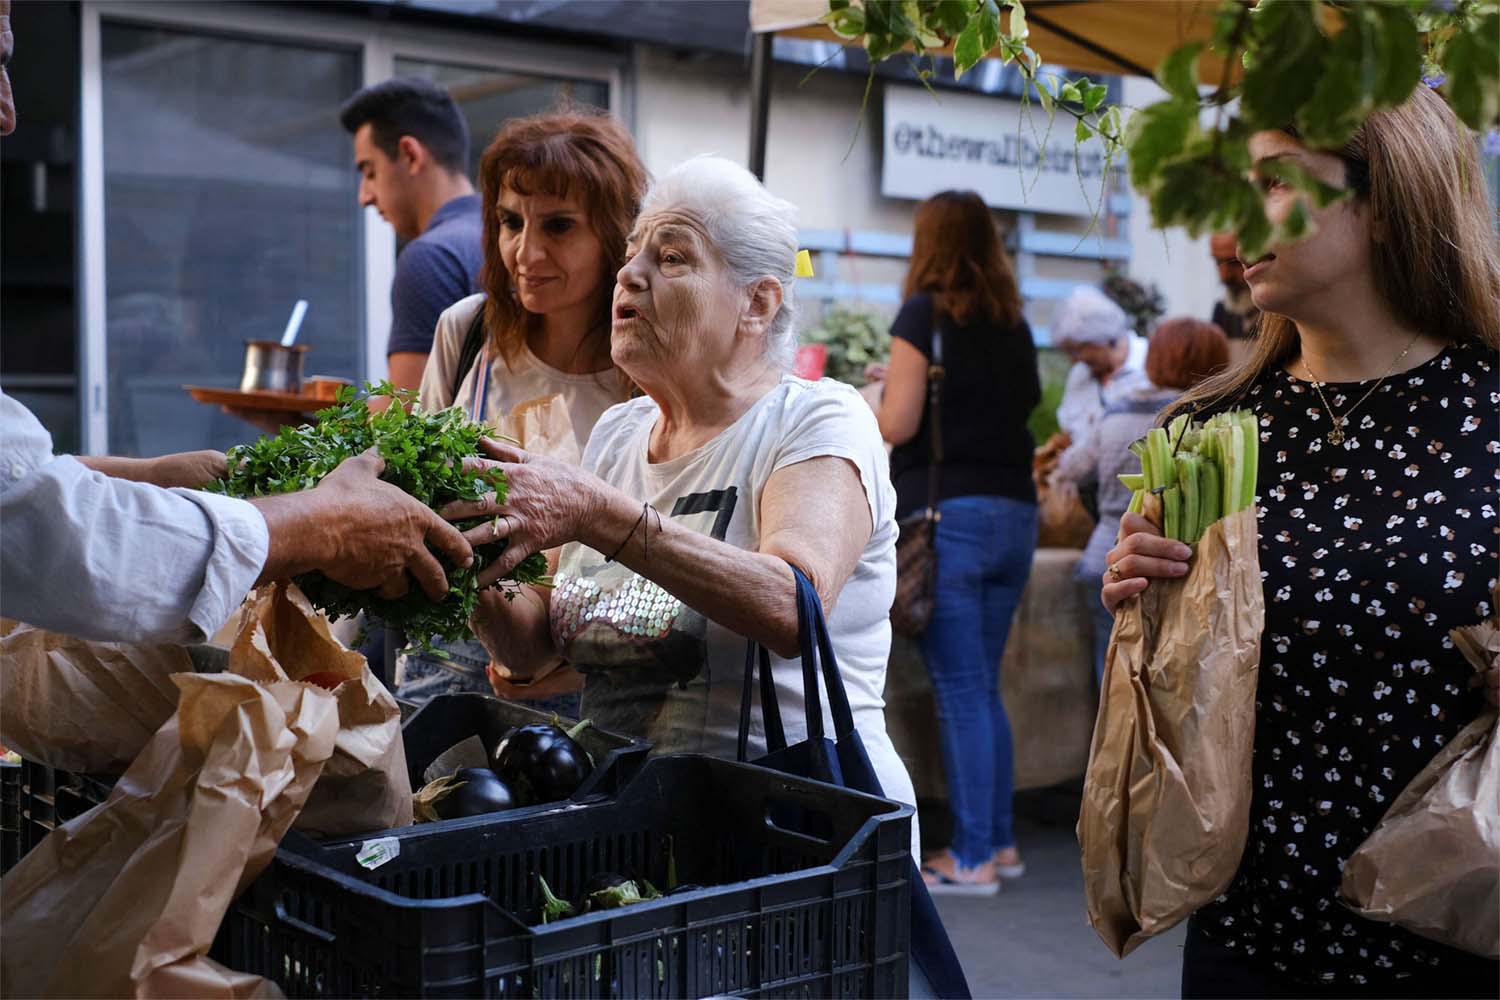 Food prices in Lebanon are 16 times higher than they were in October 2019